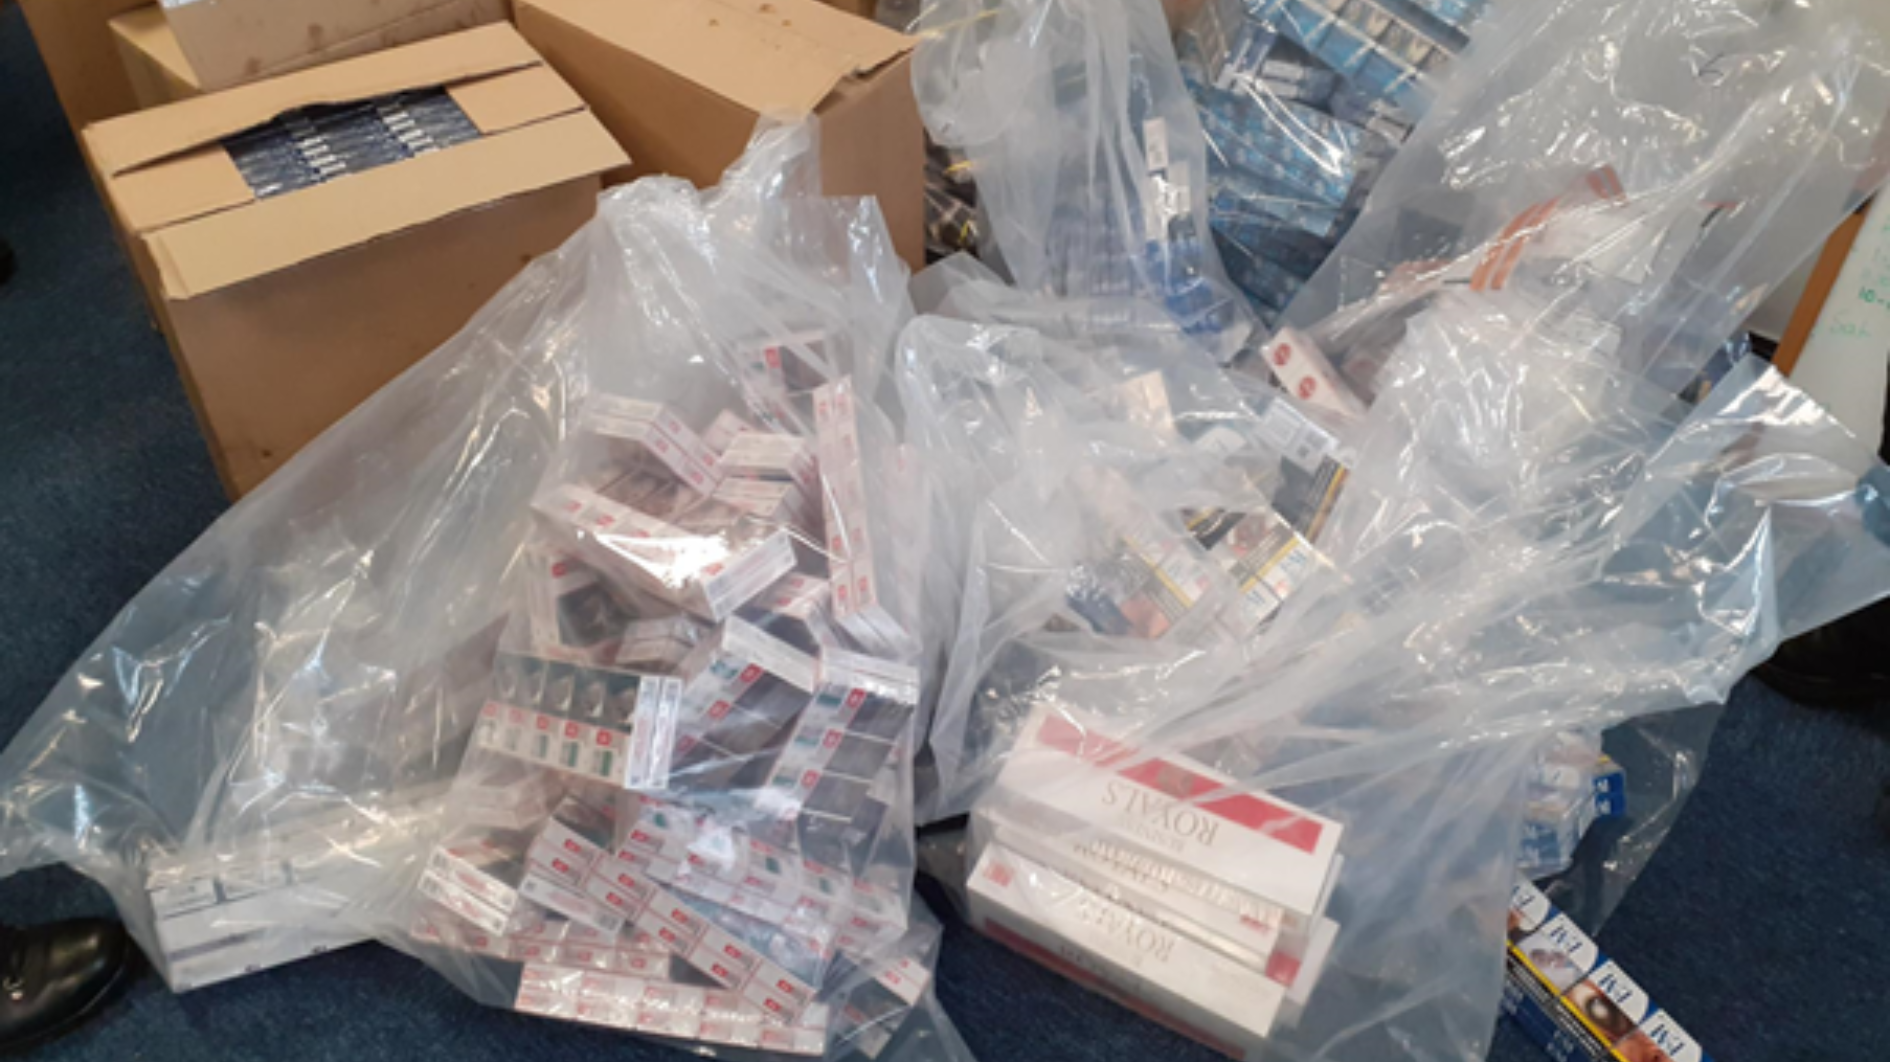 Boxes and bags full of illegal cigarettes